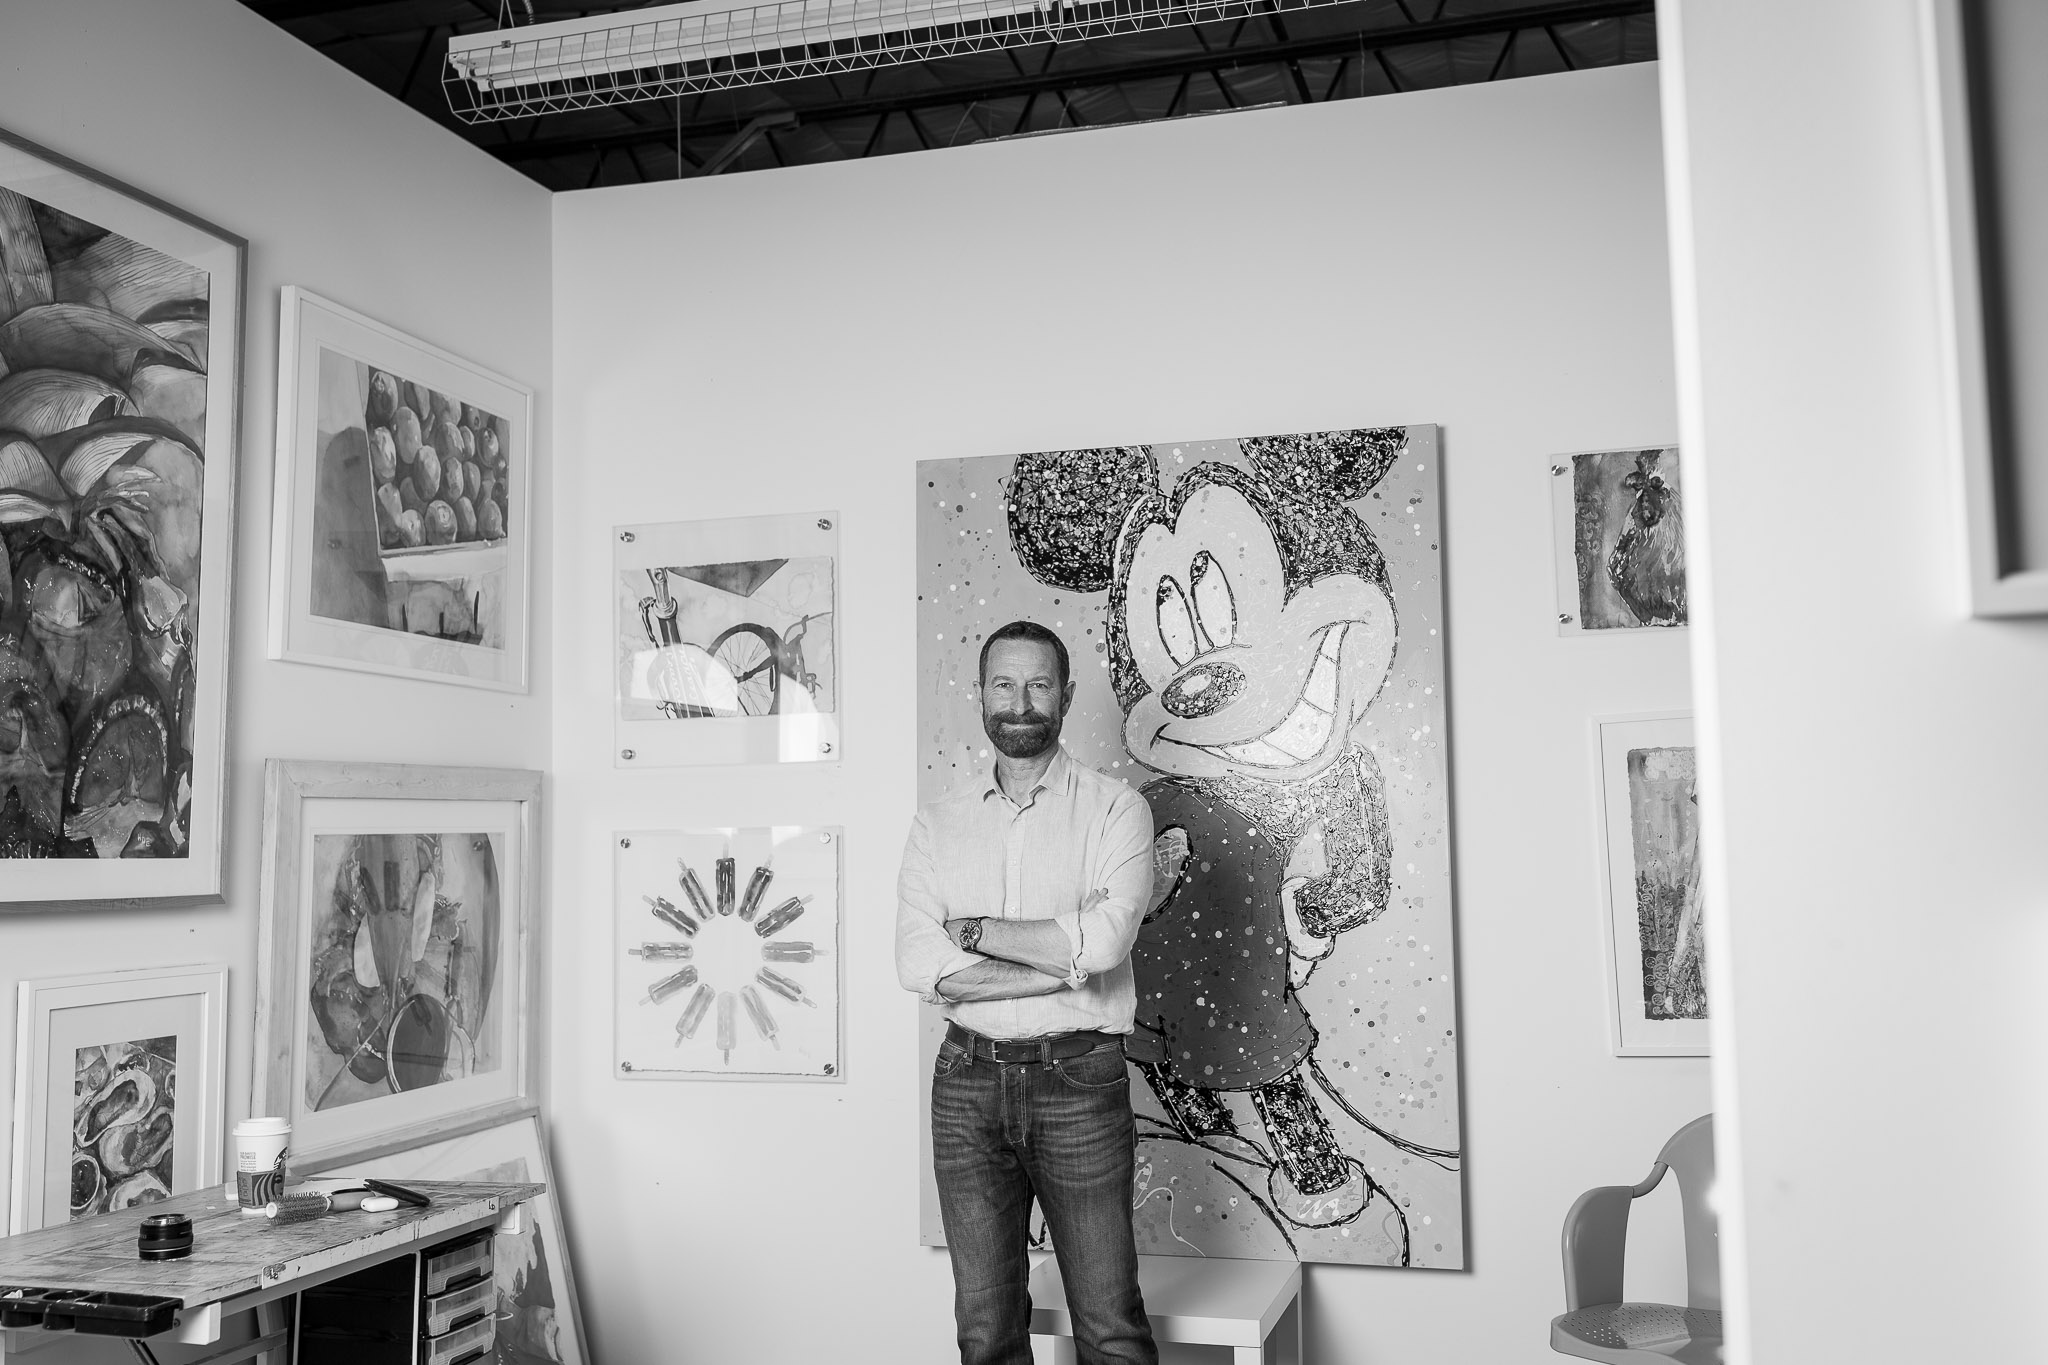  Duncan Wardle standing in front of his Mickey Painting in a room full of colorful art.  